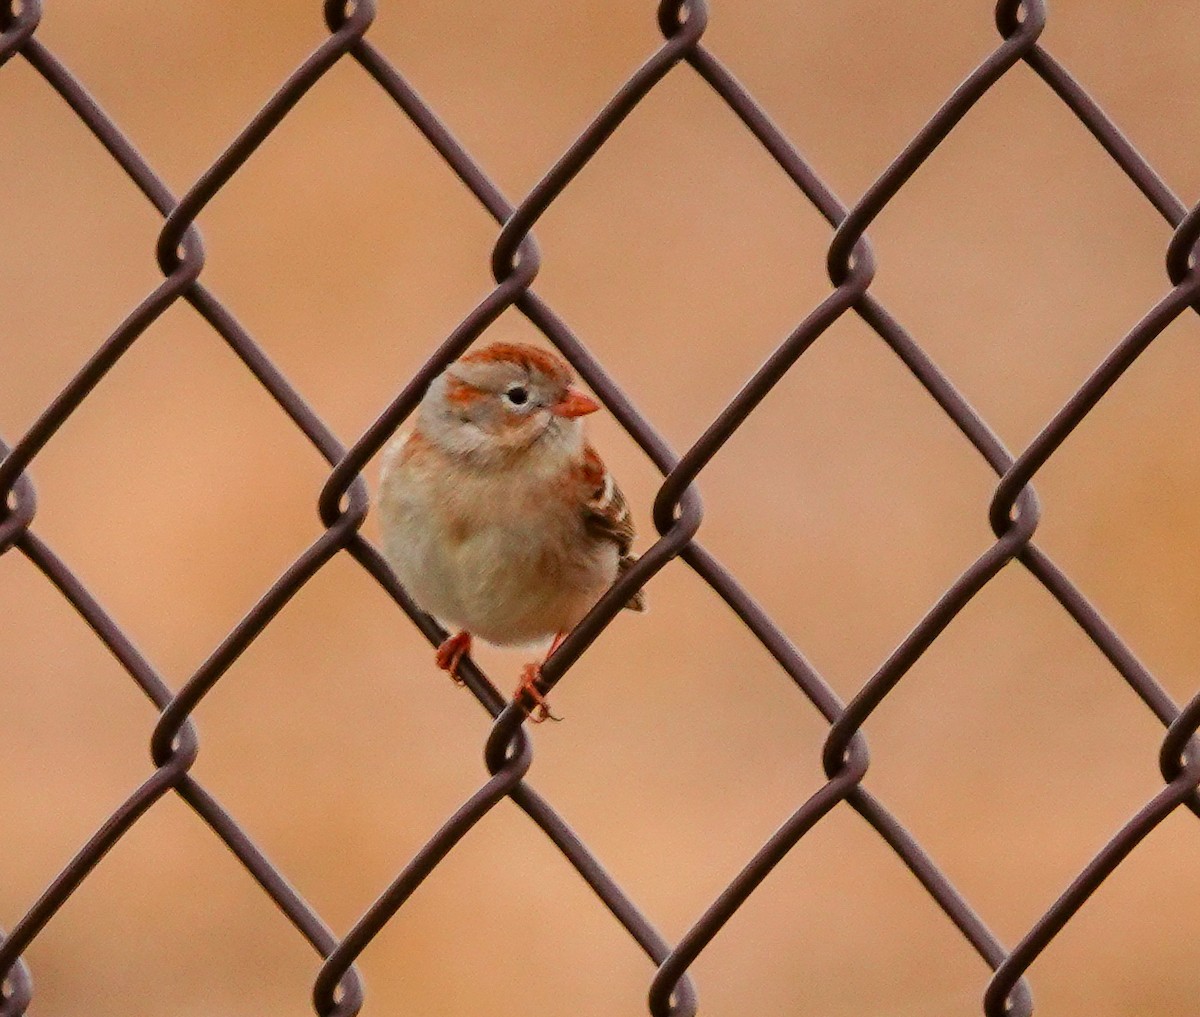 Field Sparrow - Larry Theller